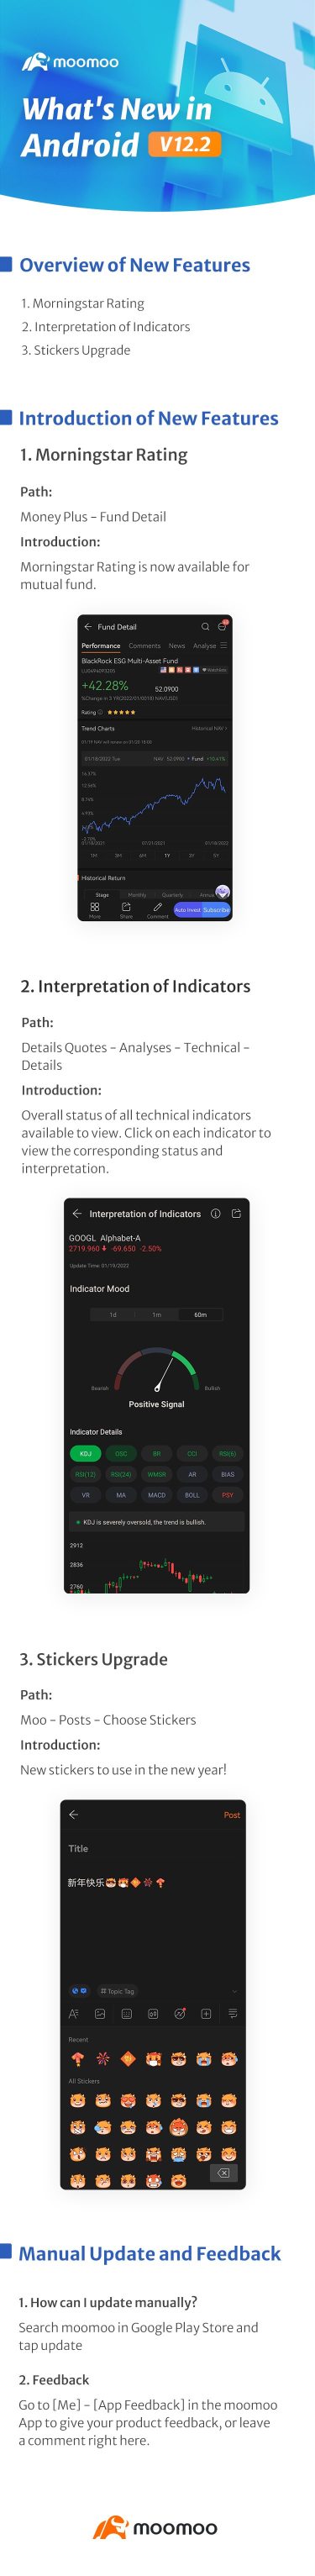 What's New: Interpretation of Indicators Optimized in Android v12.2